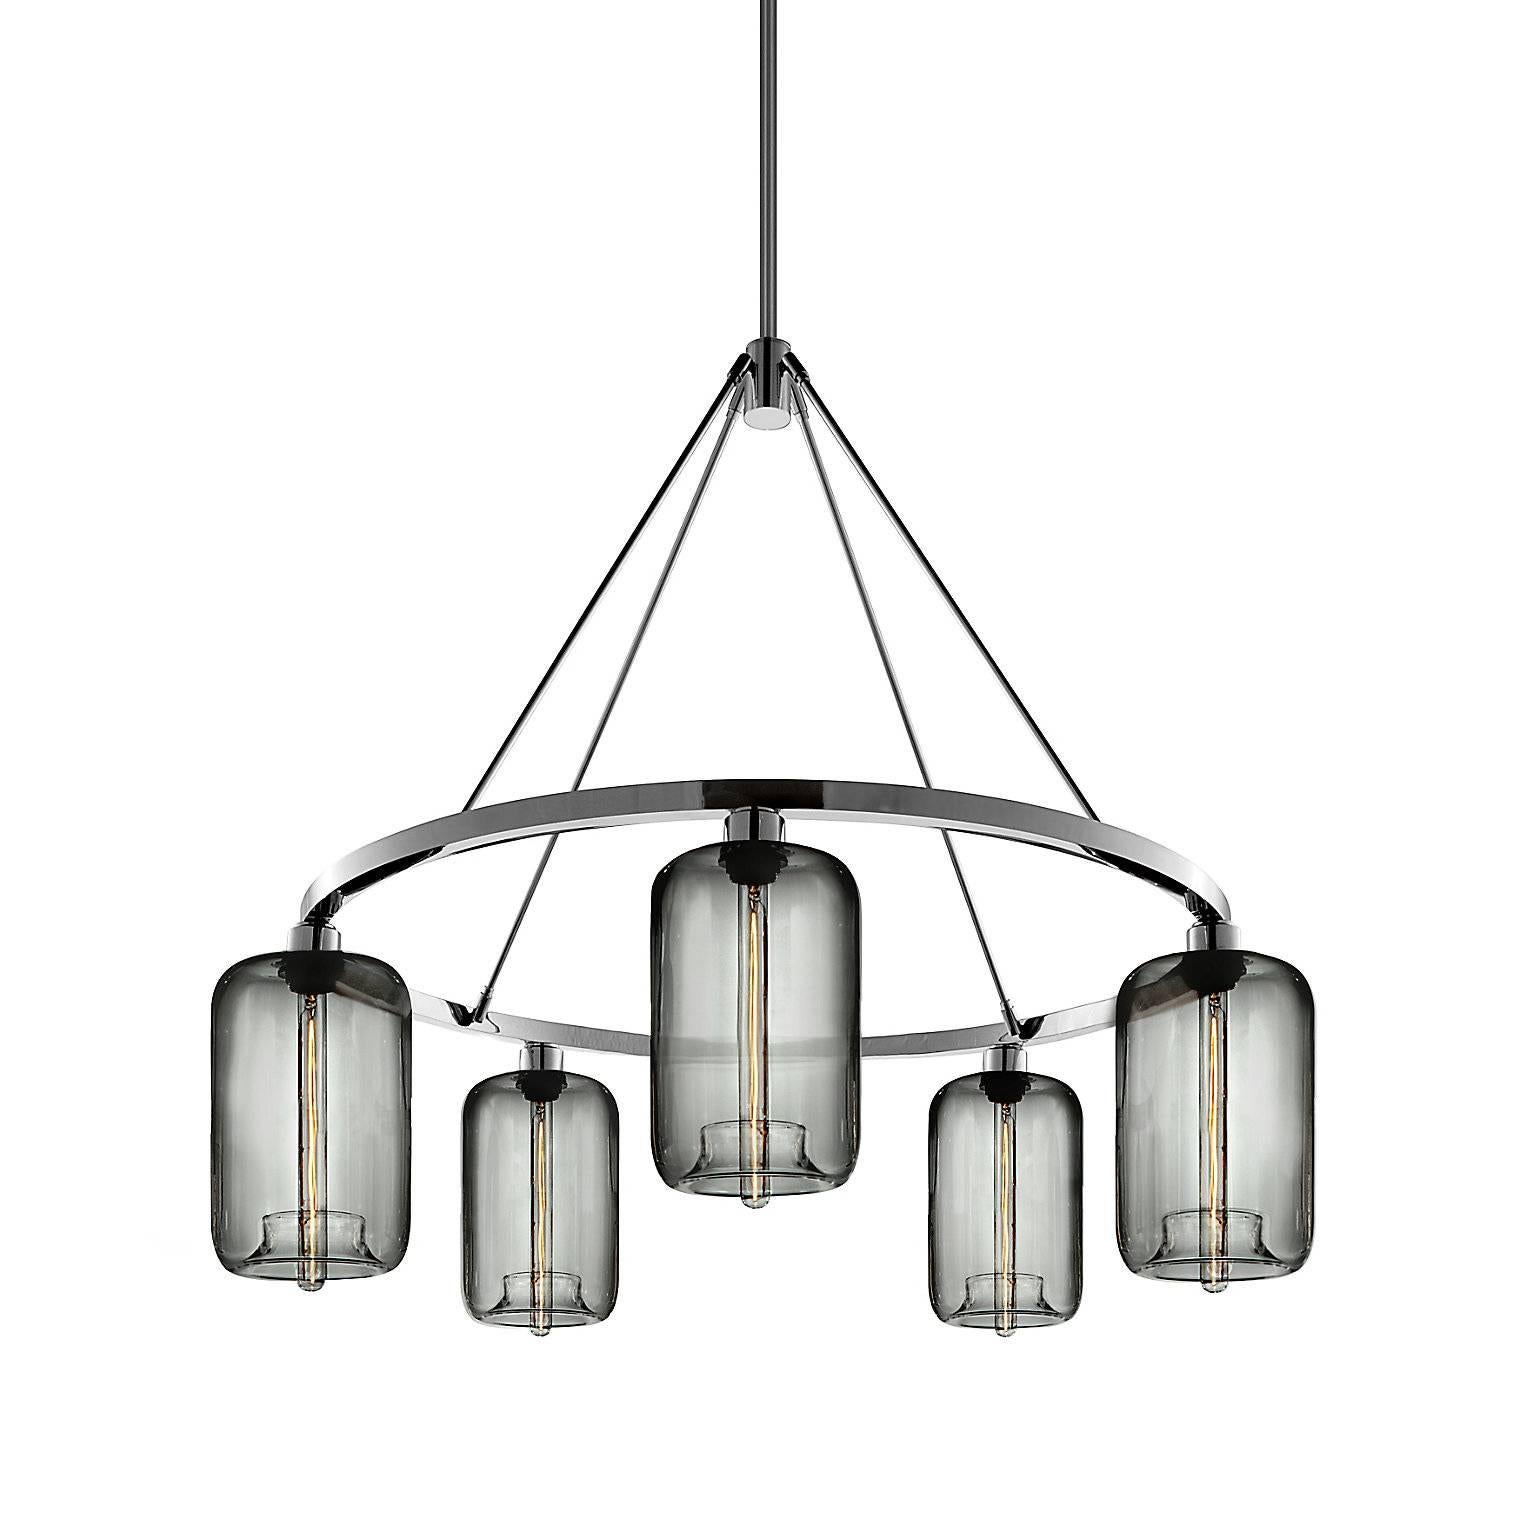 Pod Sapphire Handblown Modern Glass Polished Nickel Chandelier Light In New Condition For Sale In Beacon, NY